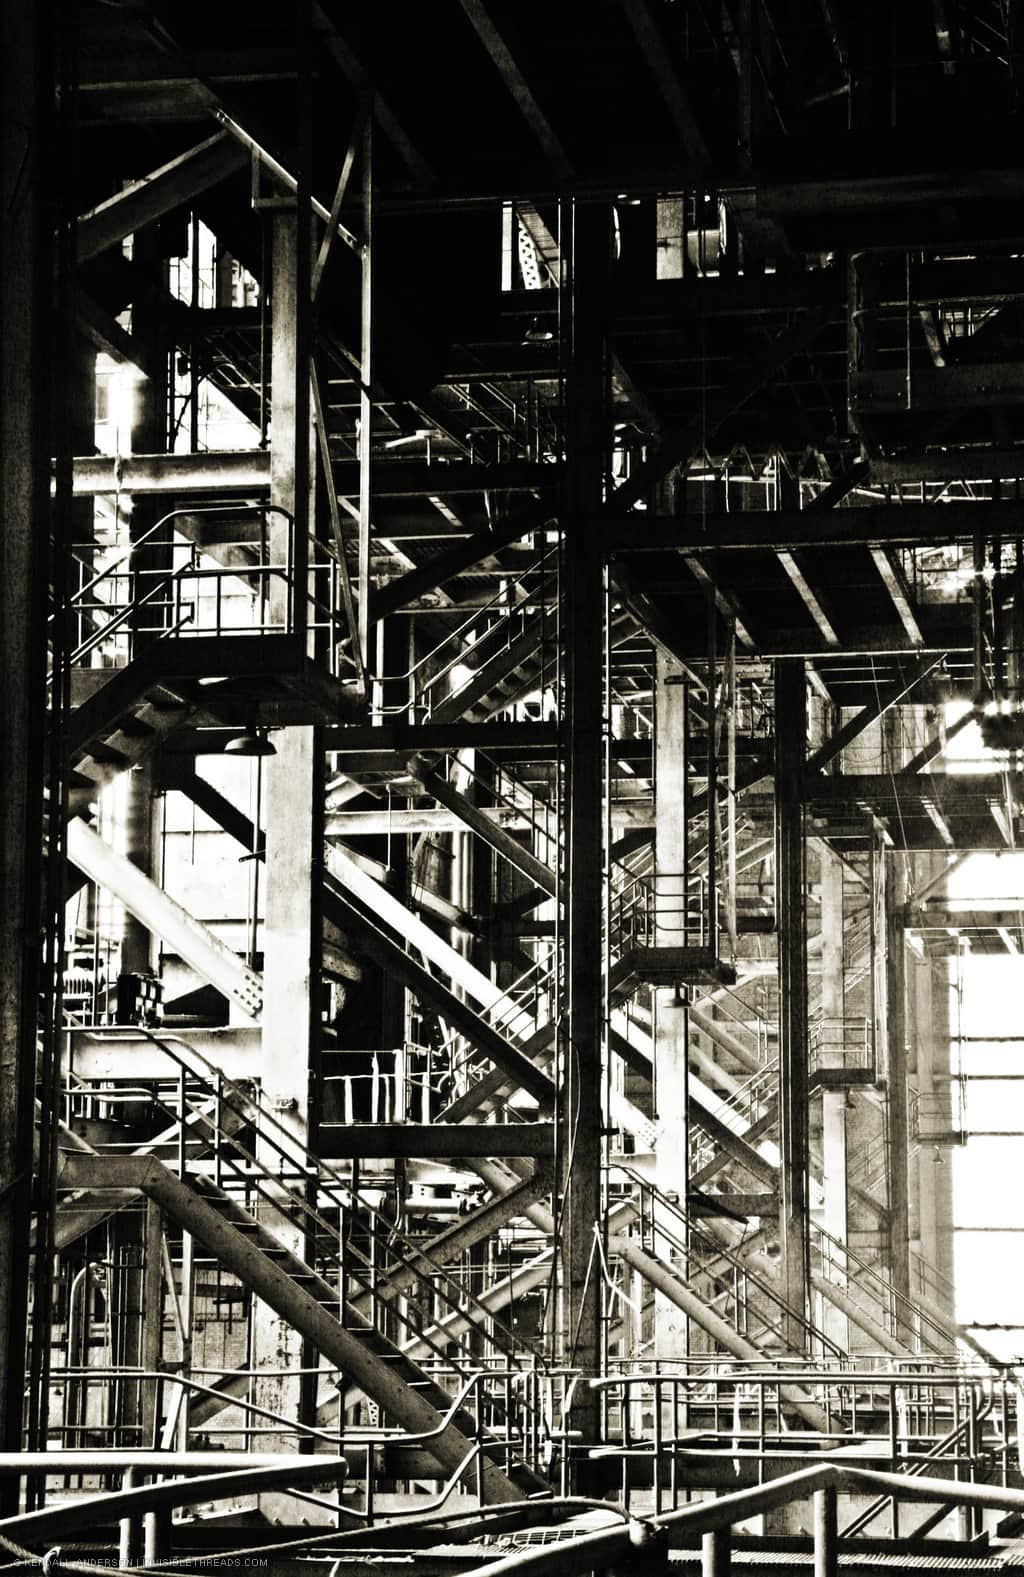 A high contrast view of the power station interior mixes arrays of columns and beams with stairs climbing up through about 5 storeys inside the building. Multiple stairwells recede into the distance towards the far wall of the building.